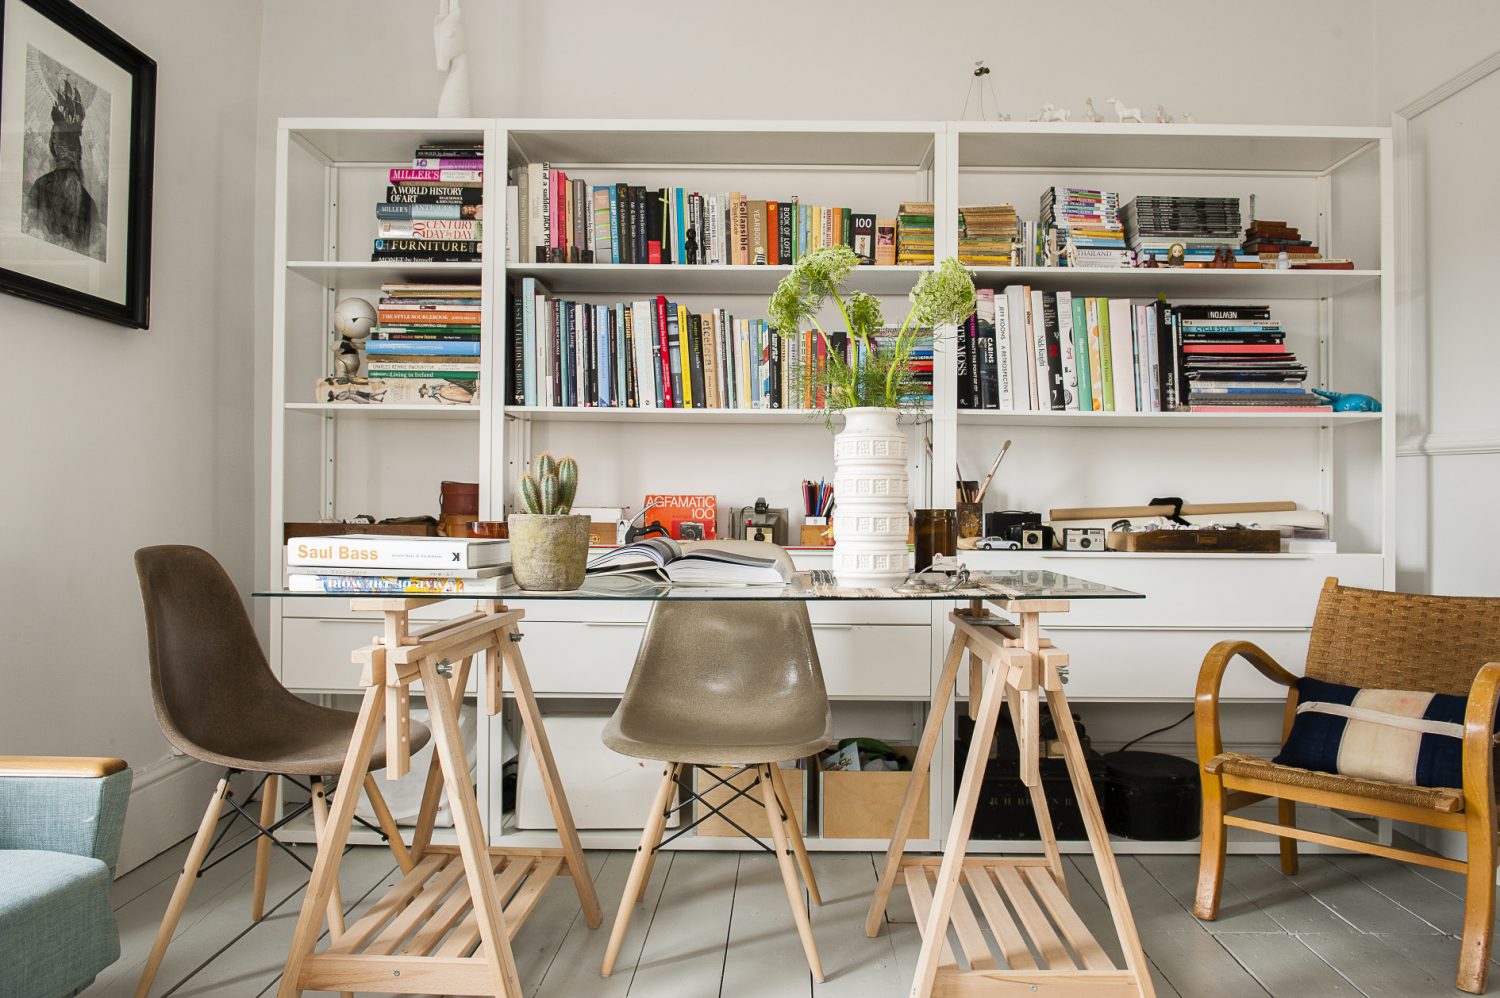 The bookcase and glass-topped desk